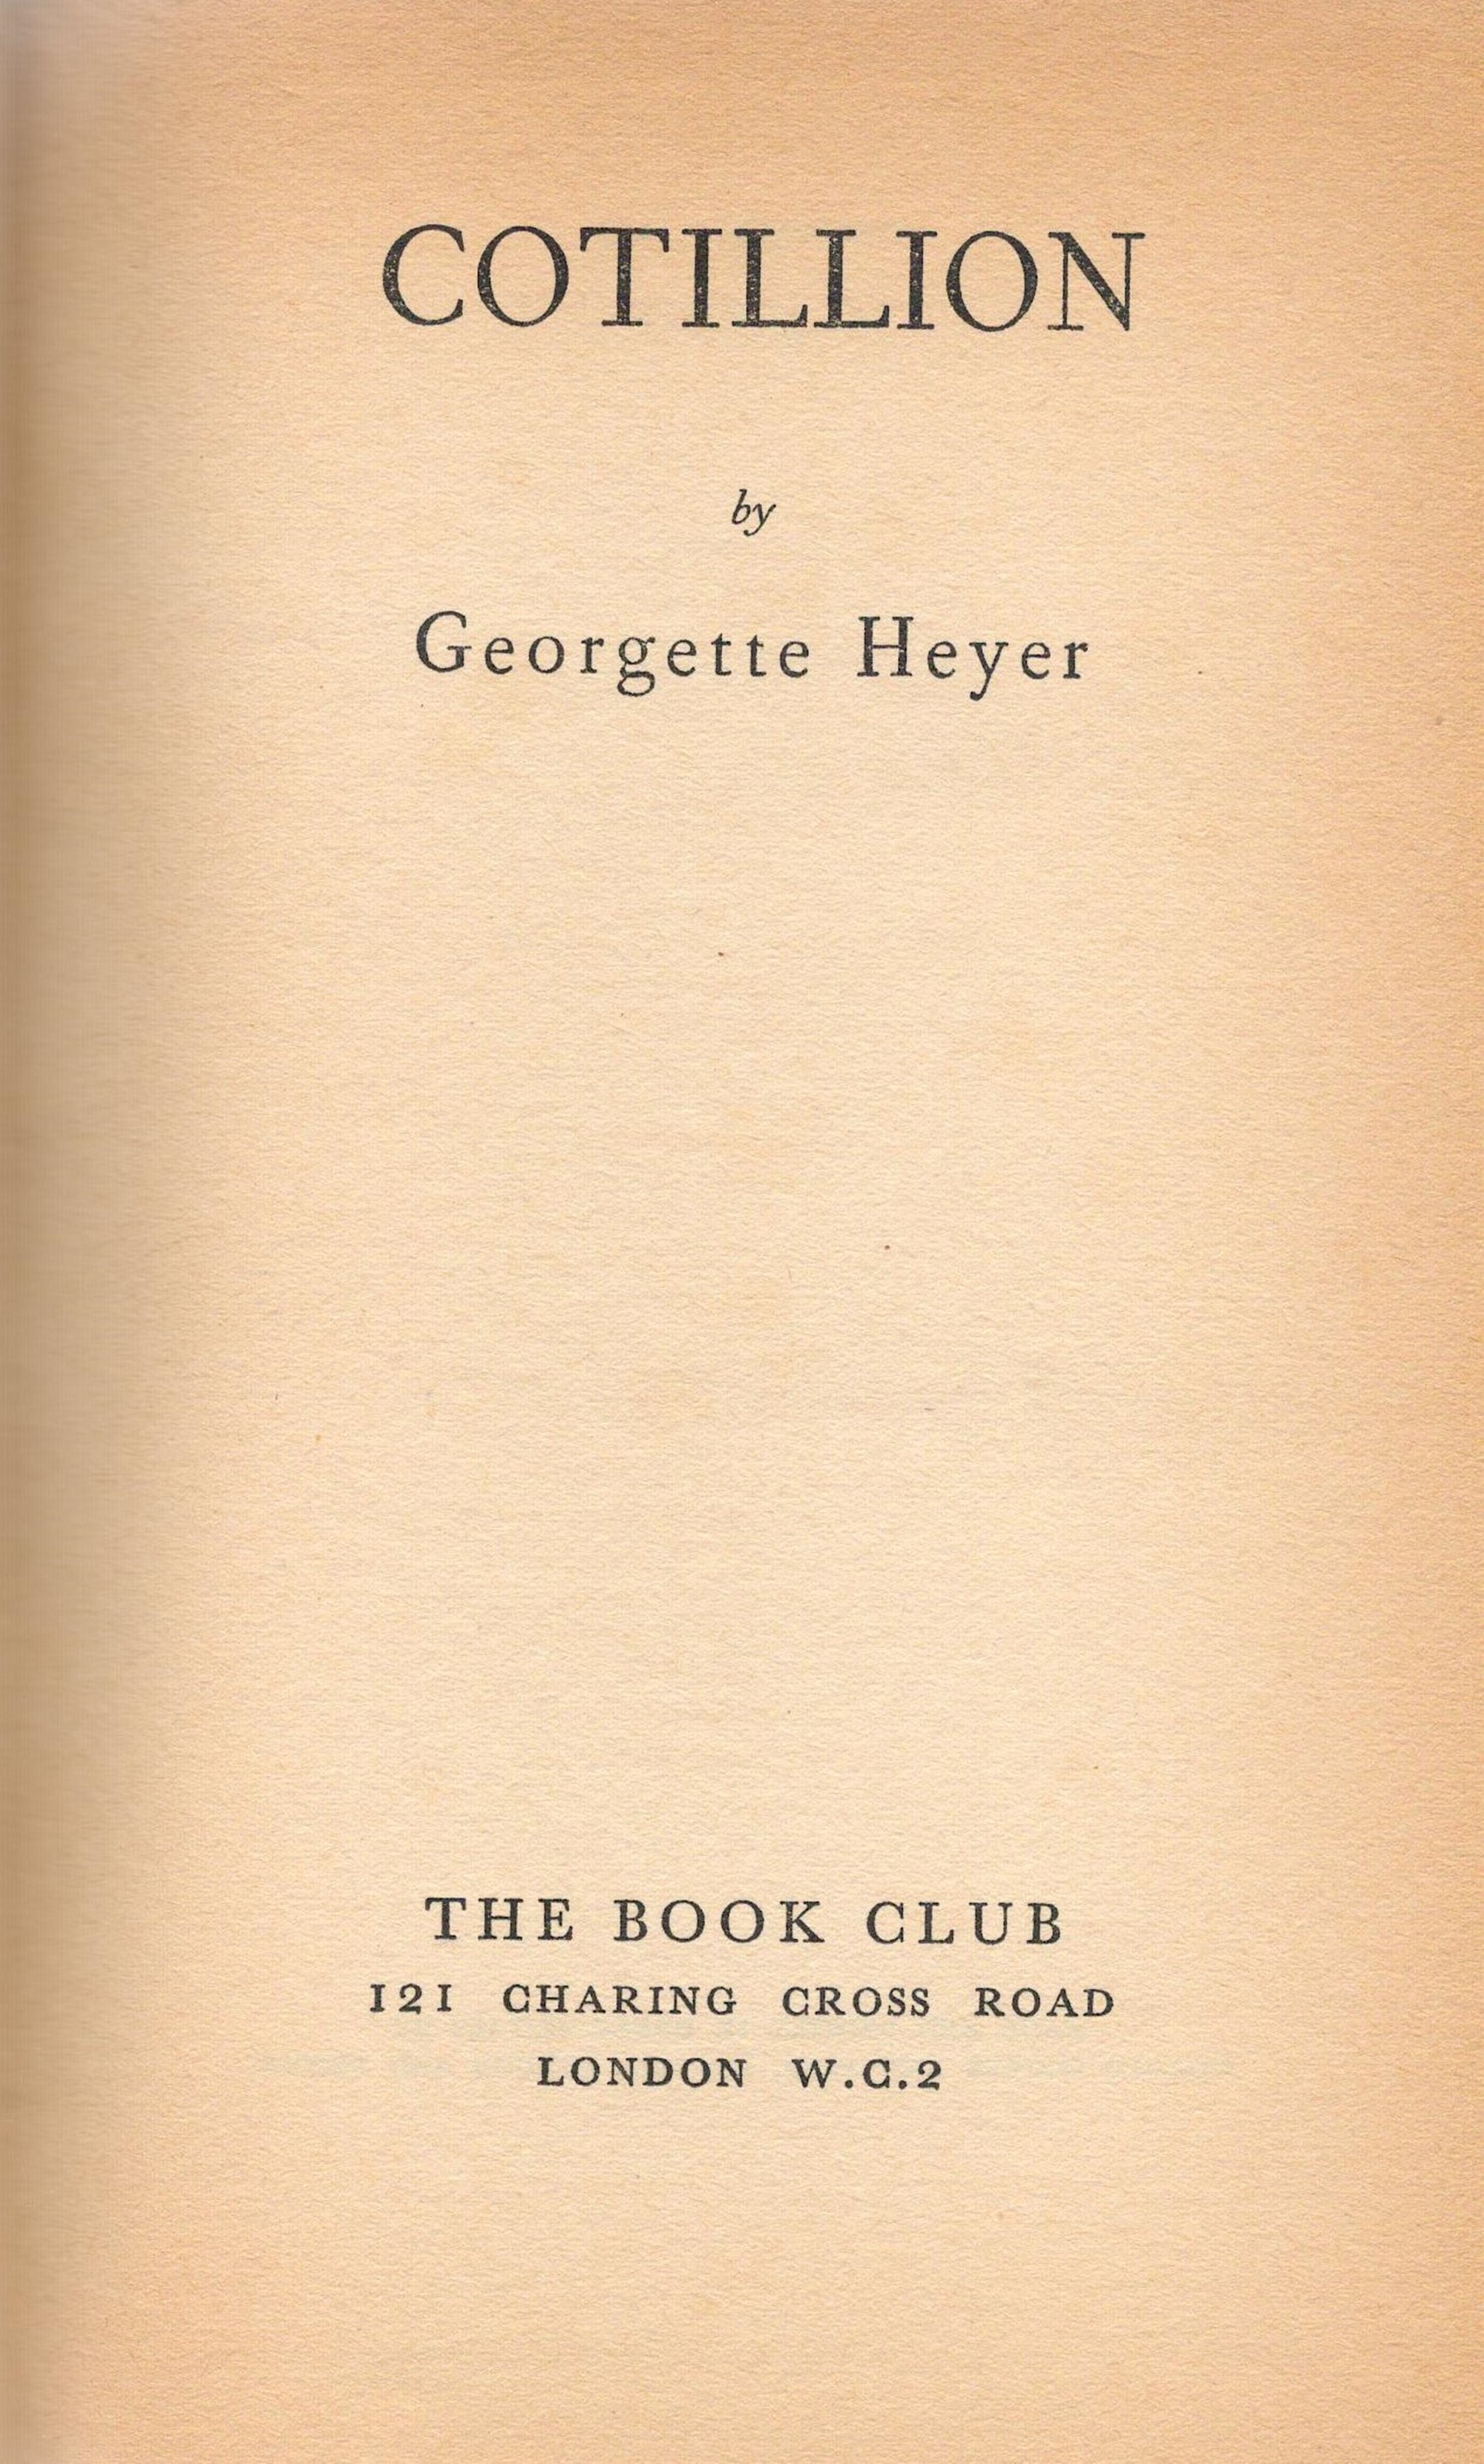 Cotillion by Georgette Heyer Hardback Book 1954 edition unknown published by The Book Club some - Image 4 of 6